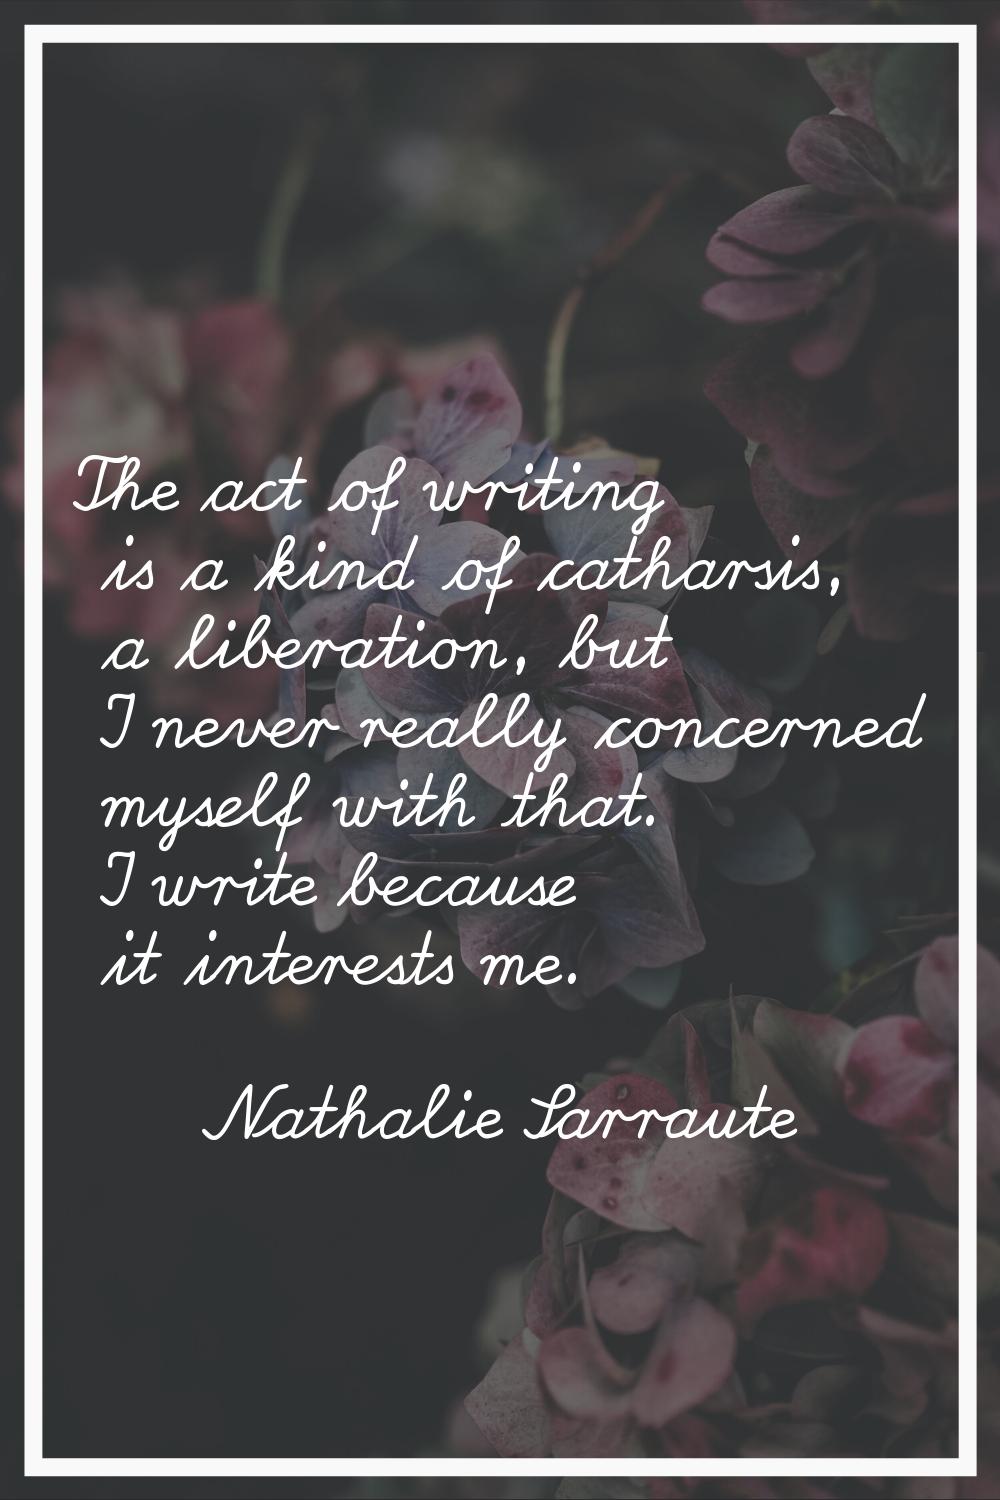 The act of writing is a kind of catharsis, a liberation, but I never really concerned myself with t